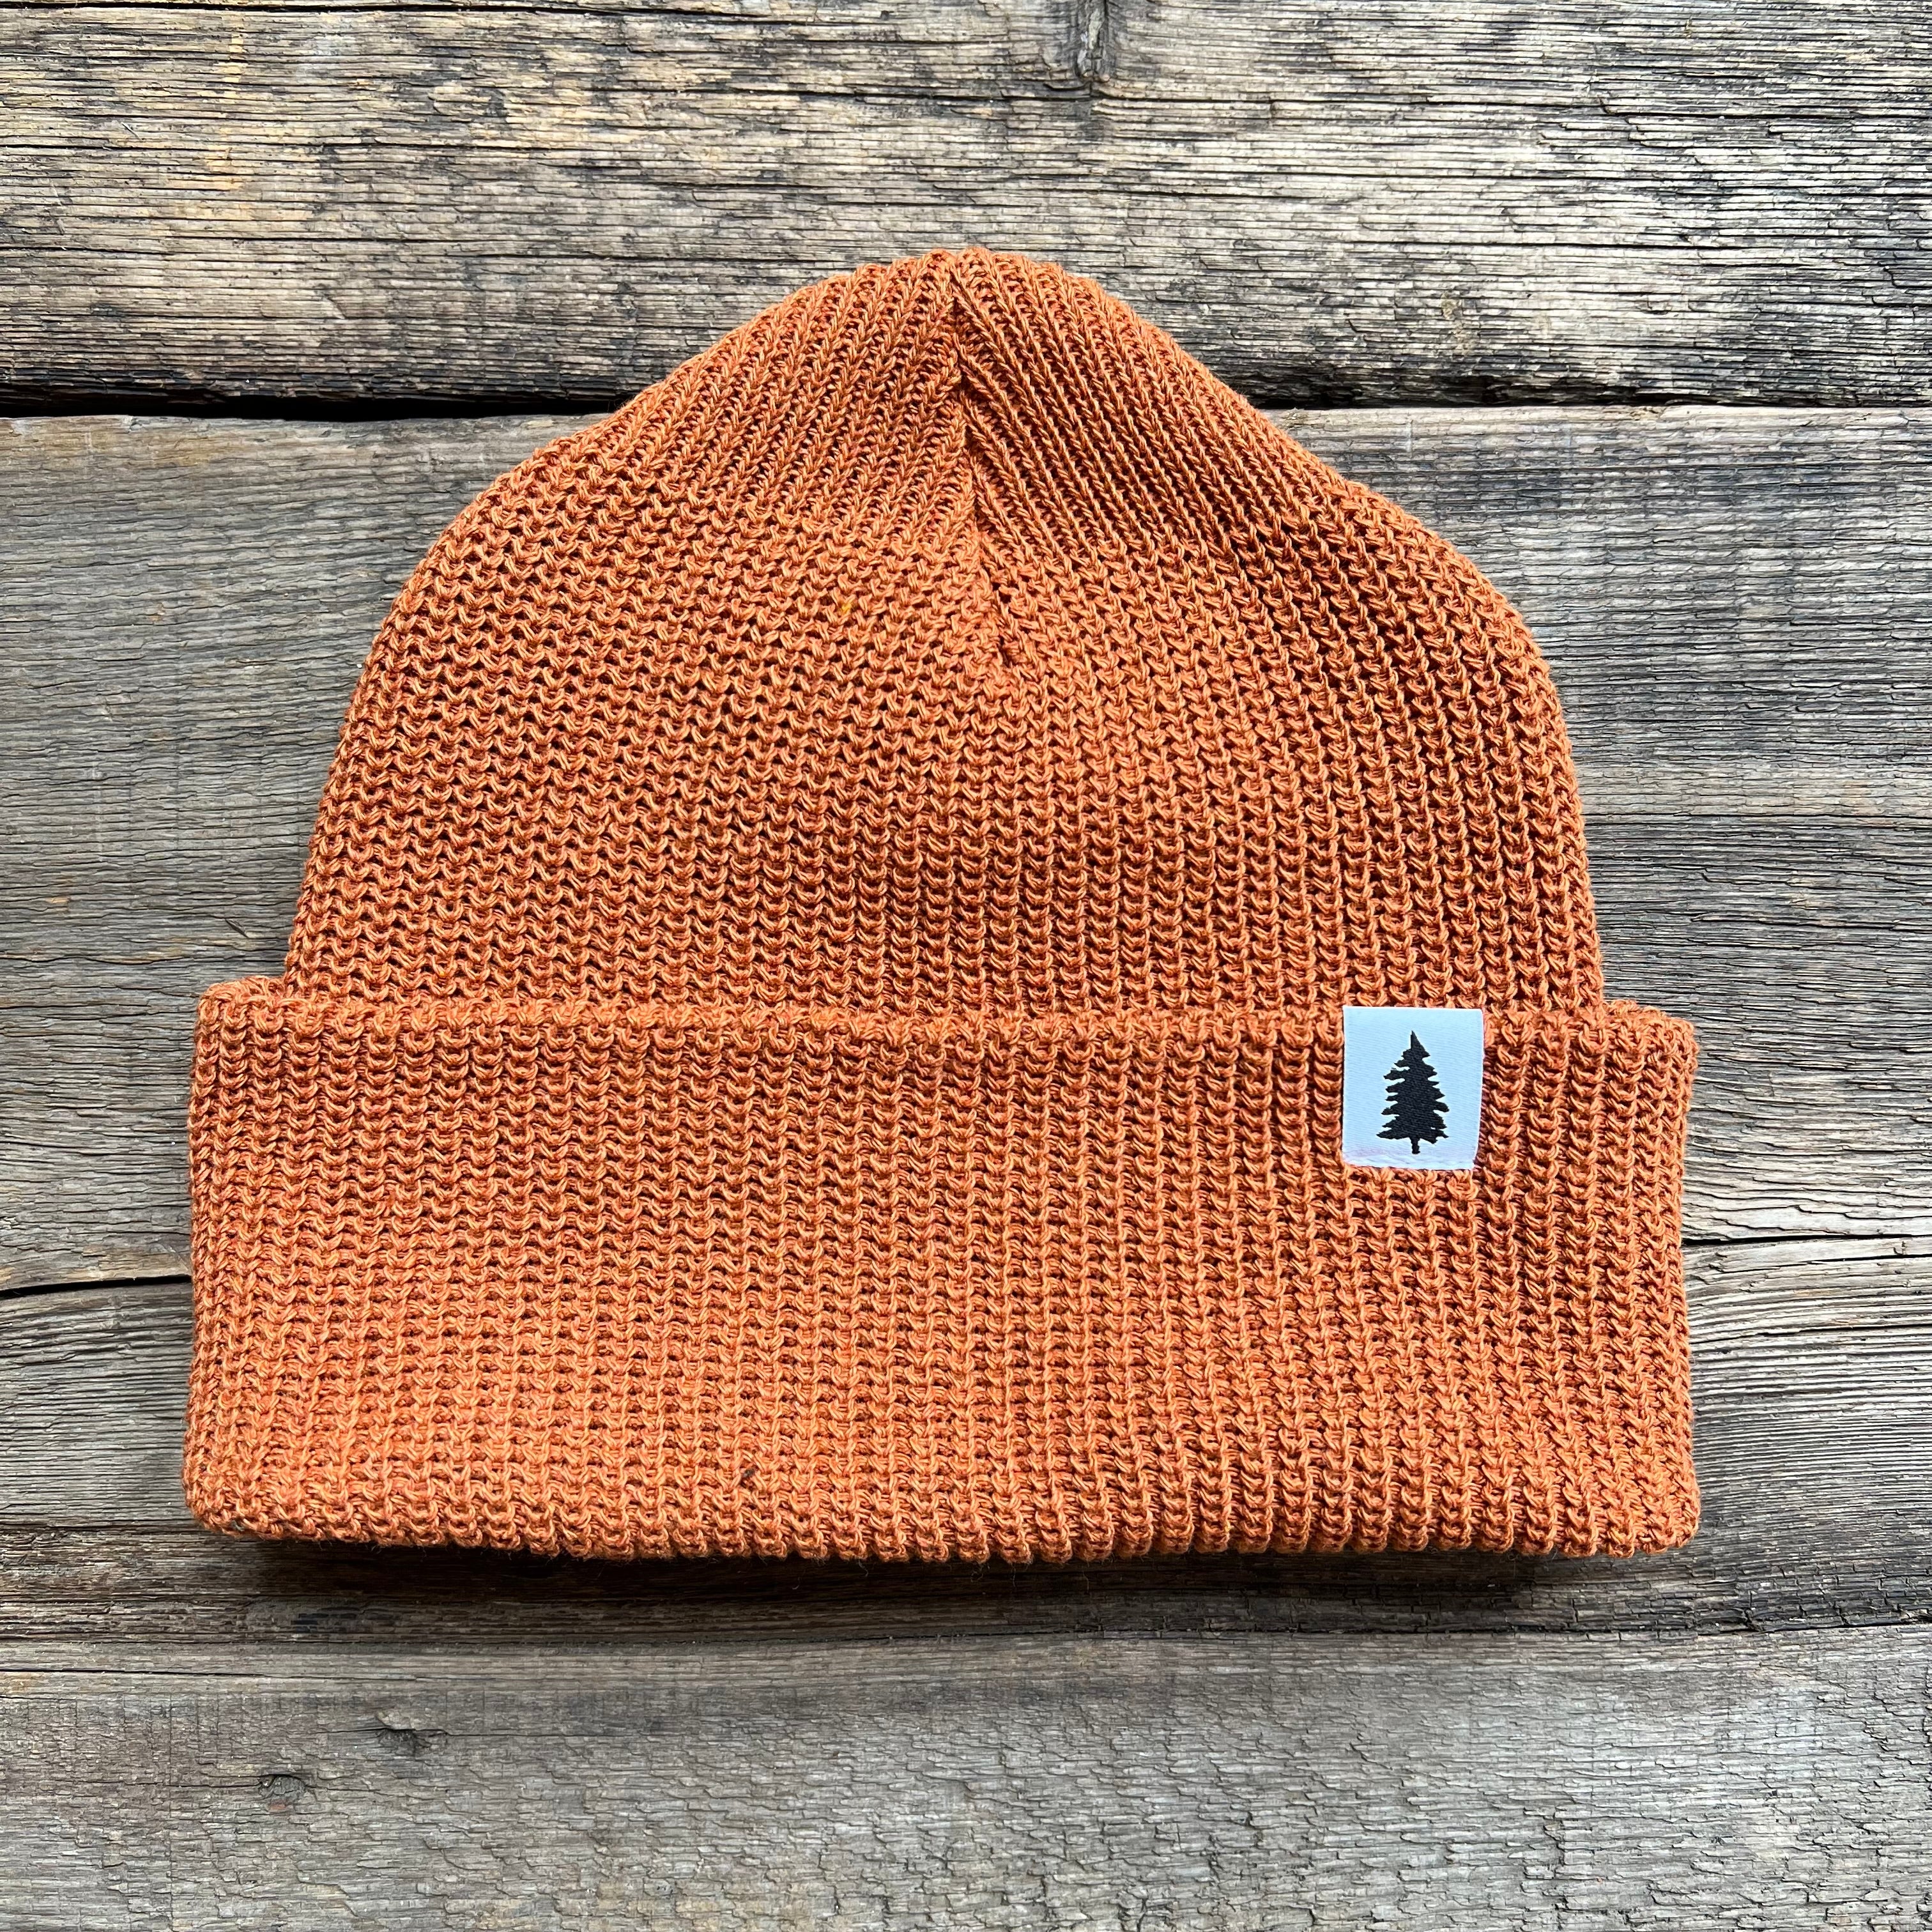 Upcycled Beanies